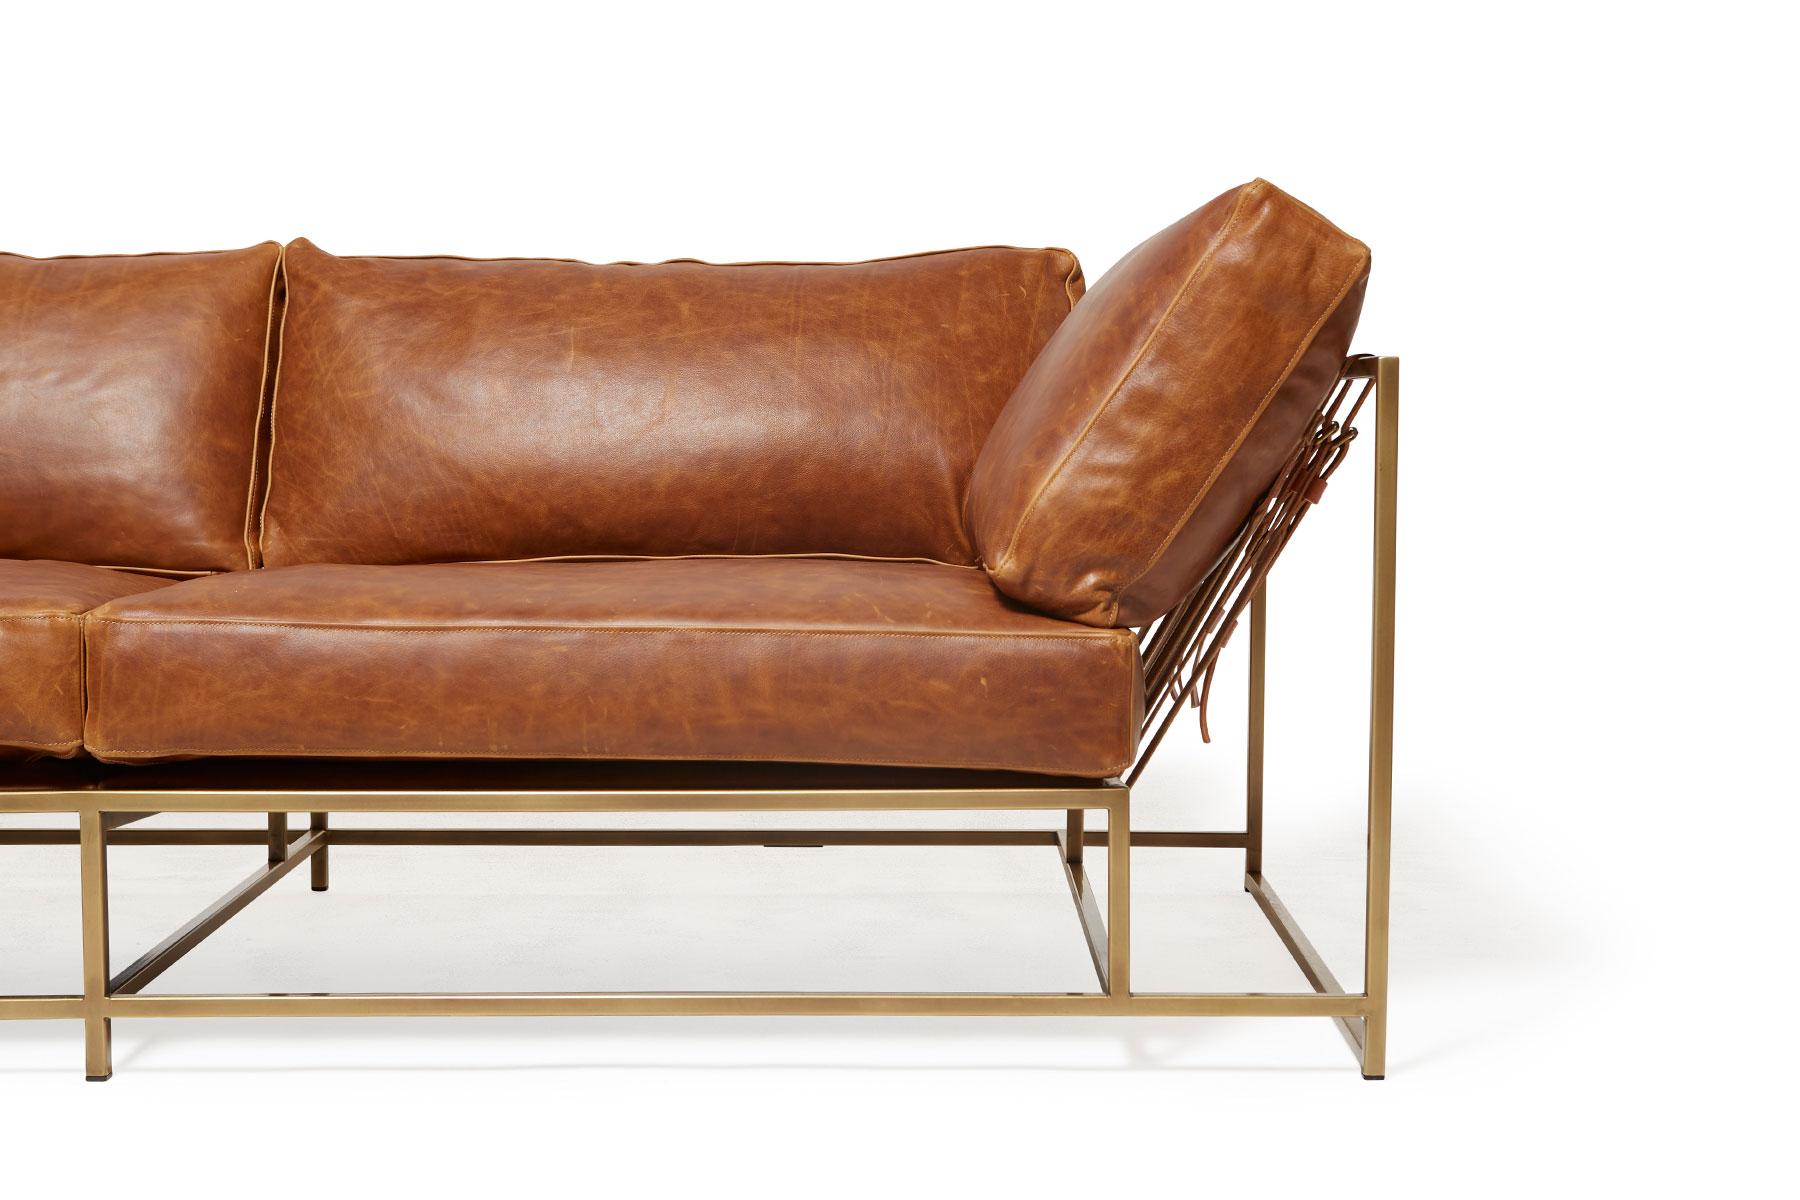 Plated Waxed Potomac Tan Leather and Antique Brass Sofa Set For Sale